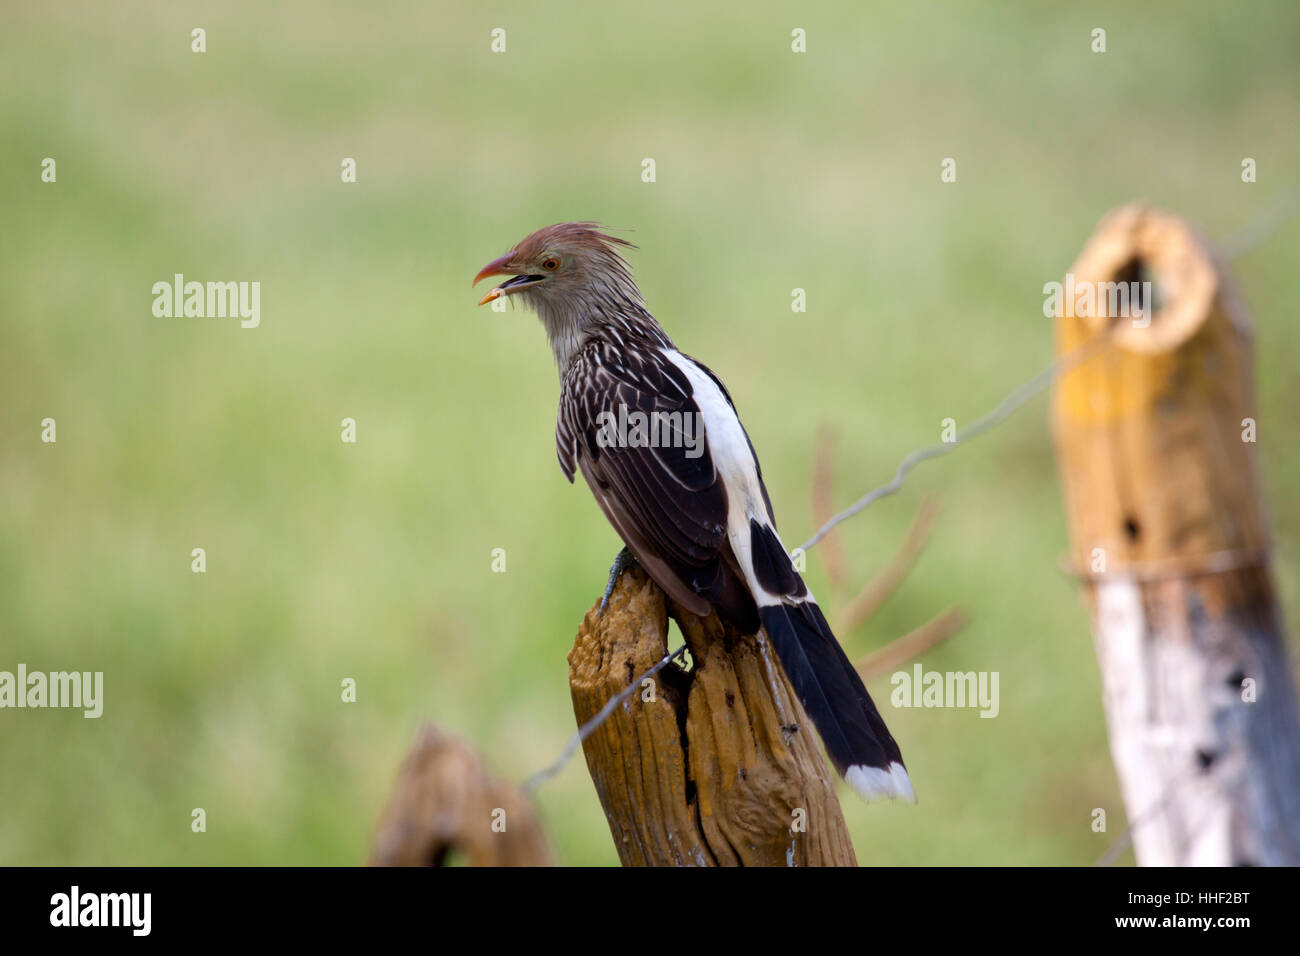 Guira cuckoo perched on post in Brazil Stock Photo